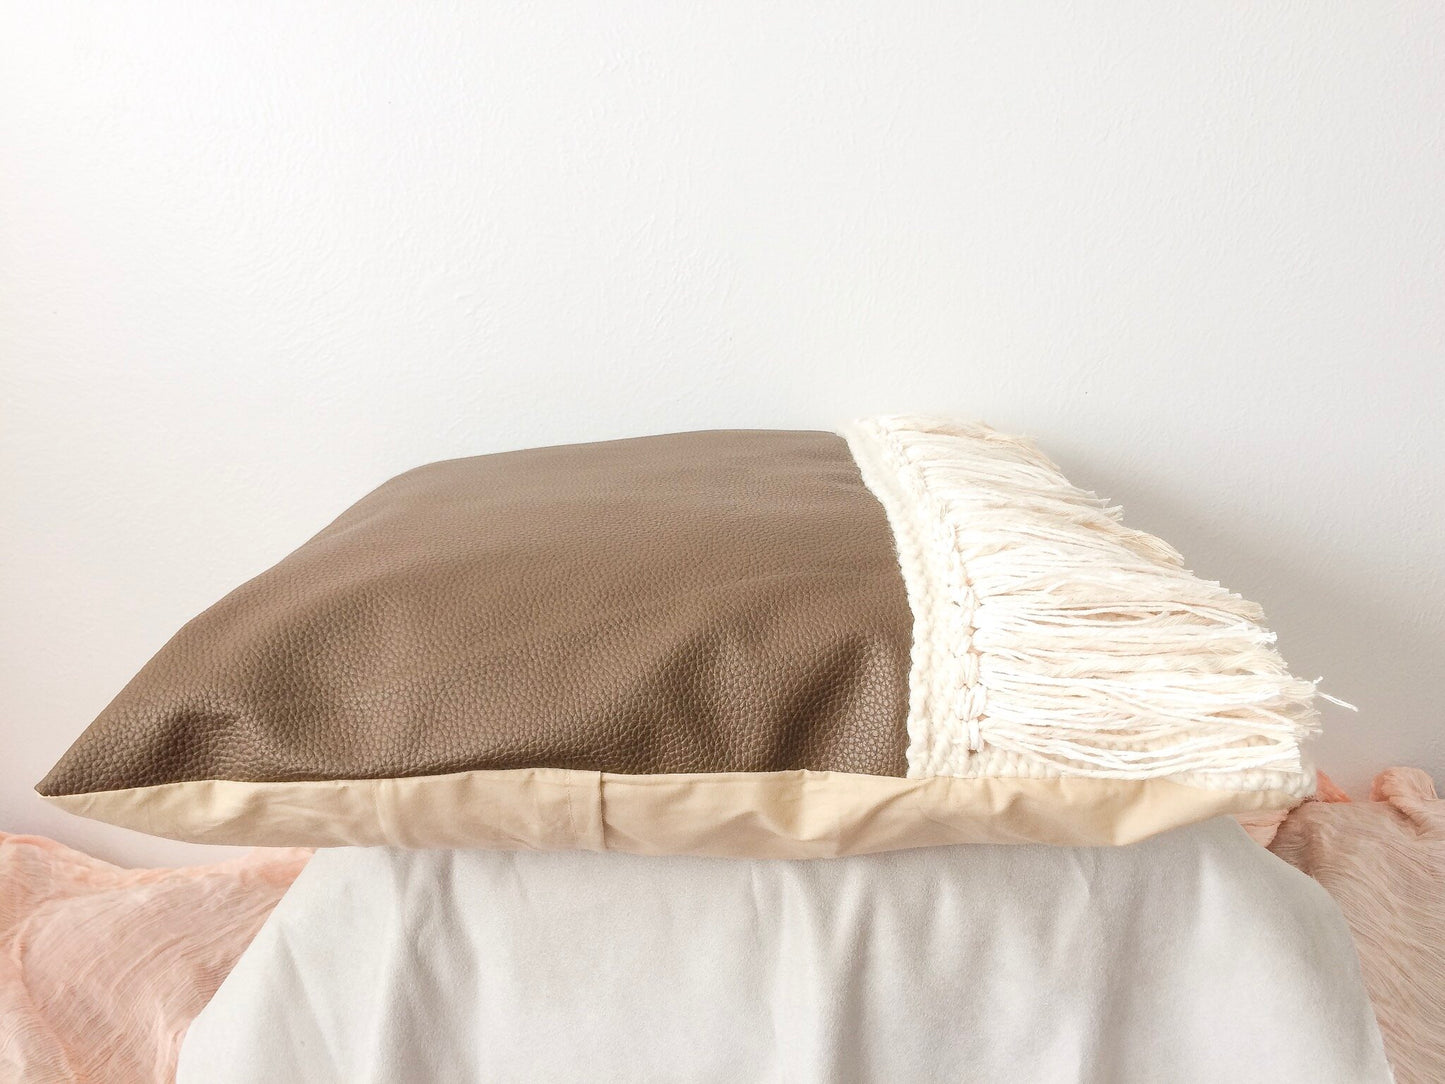 Brown leather and fringe woven pillow